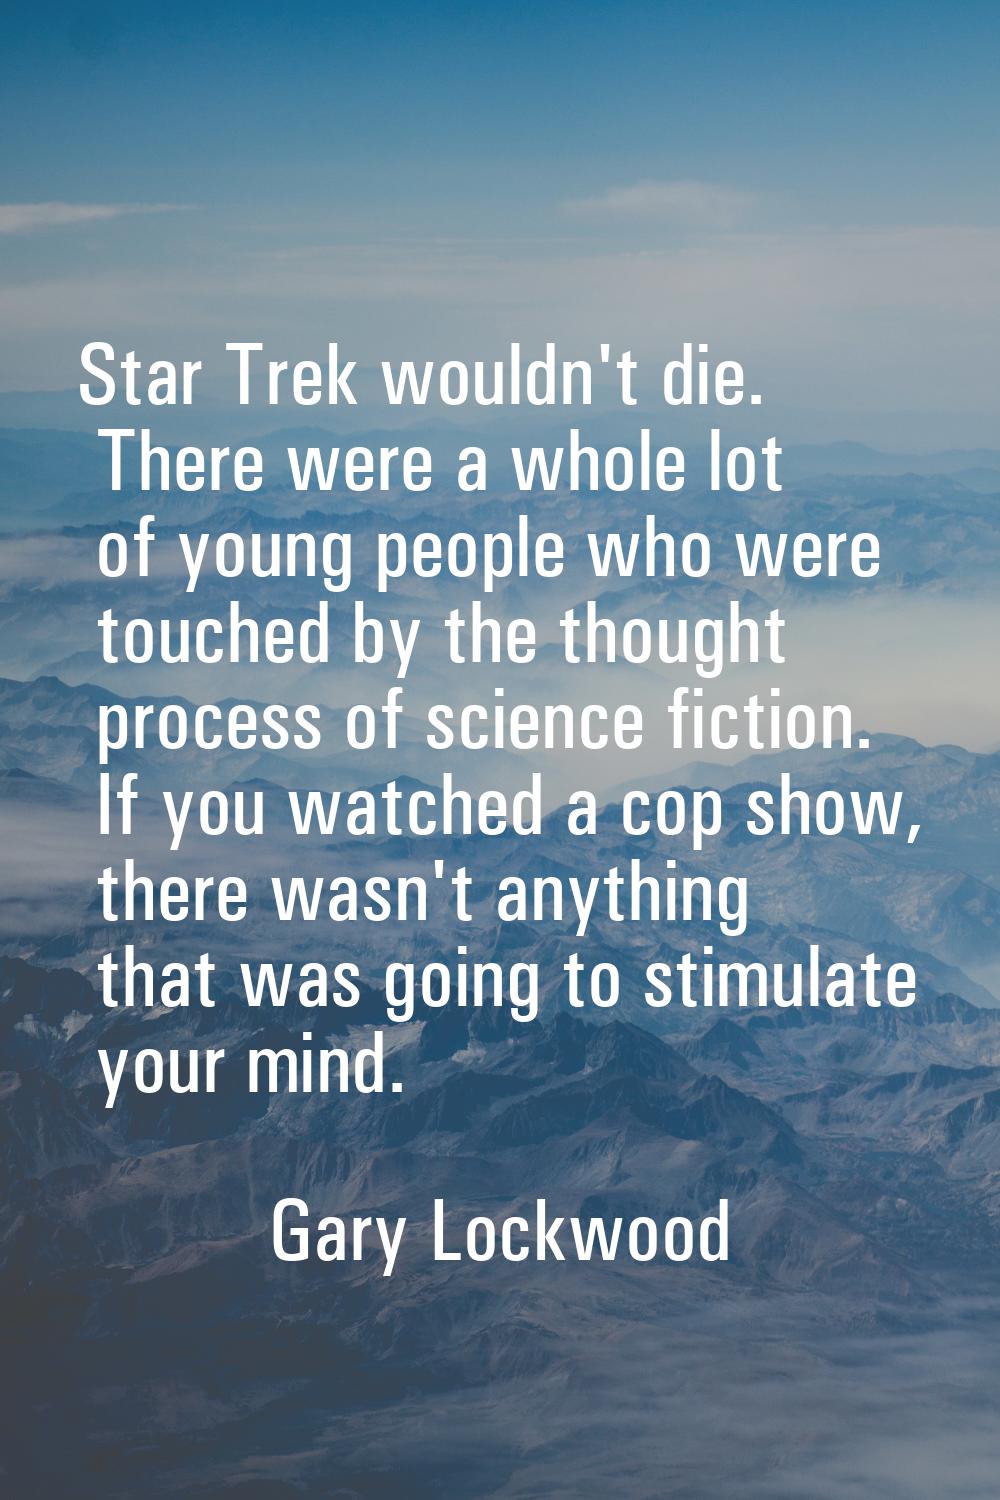 Star Trek wouldn't die. There were a whole lot of young people who were touched by the thought proc